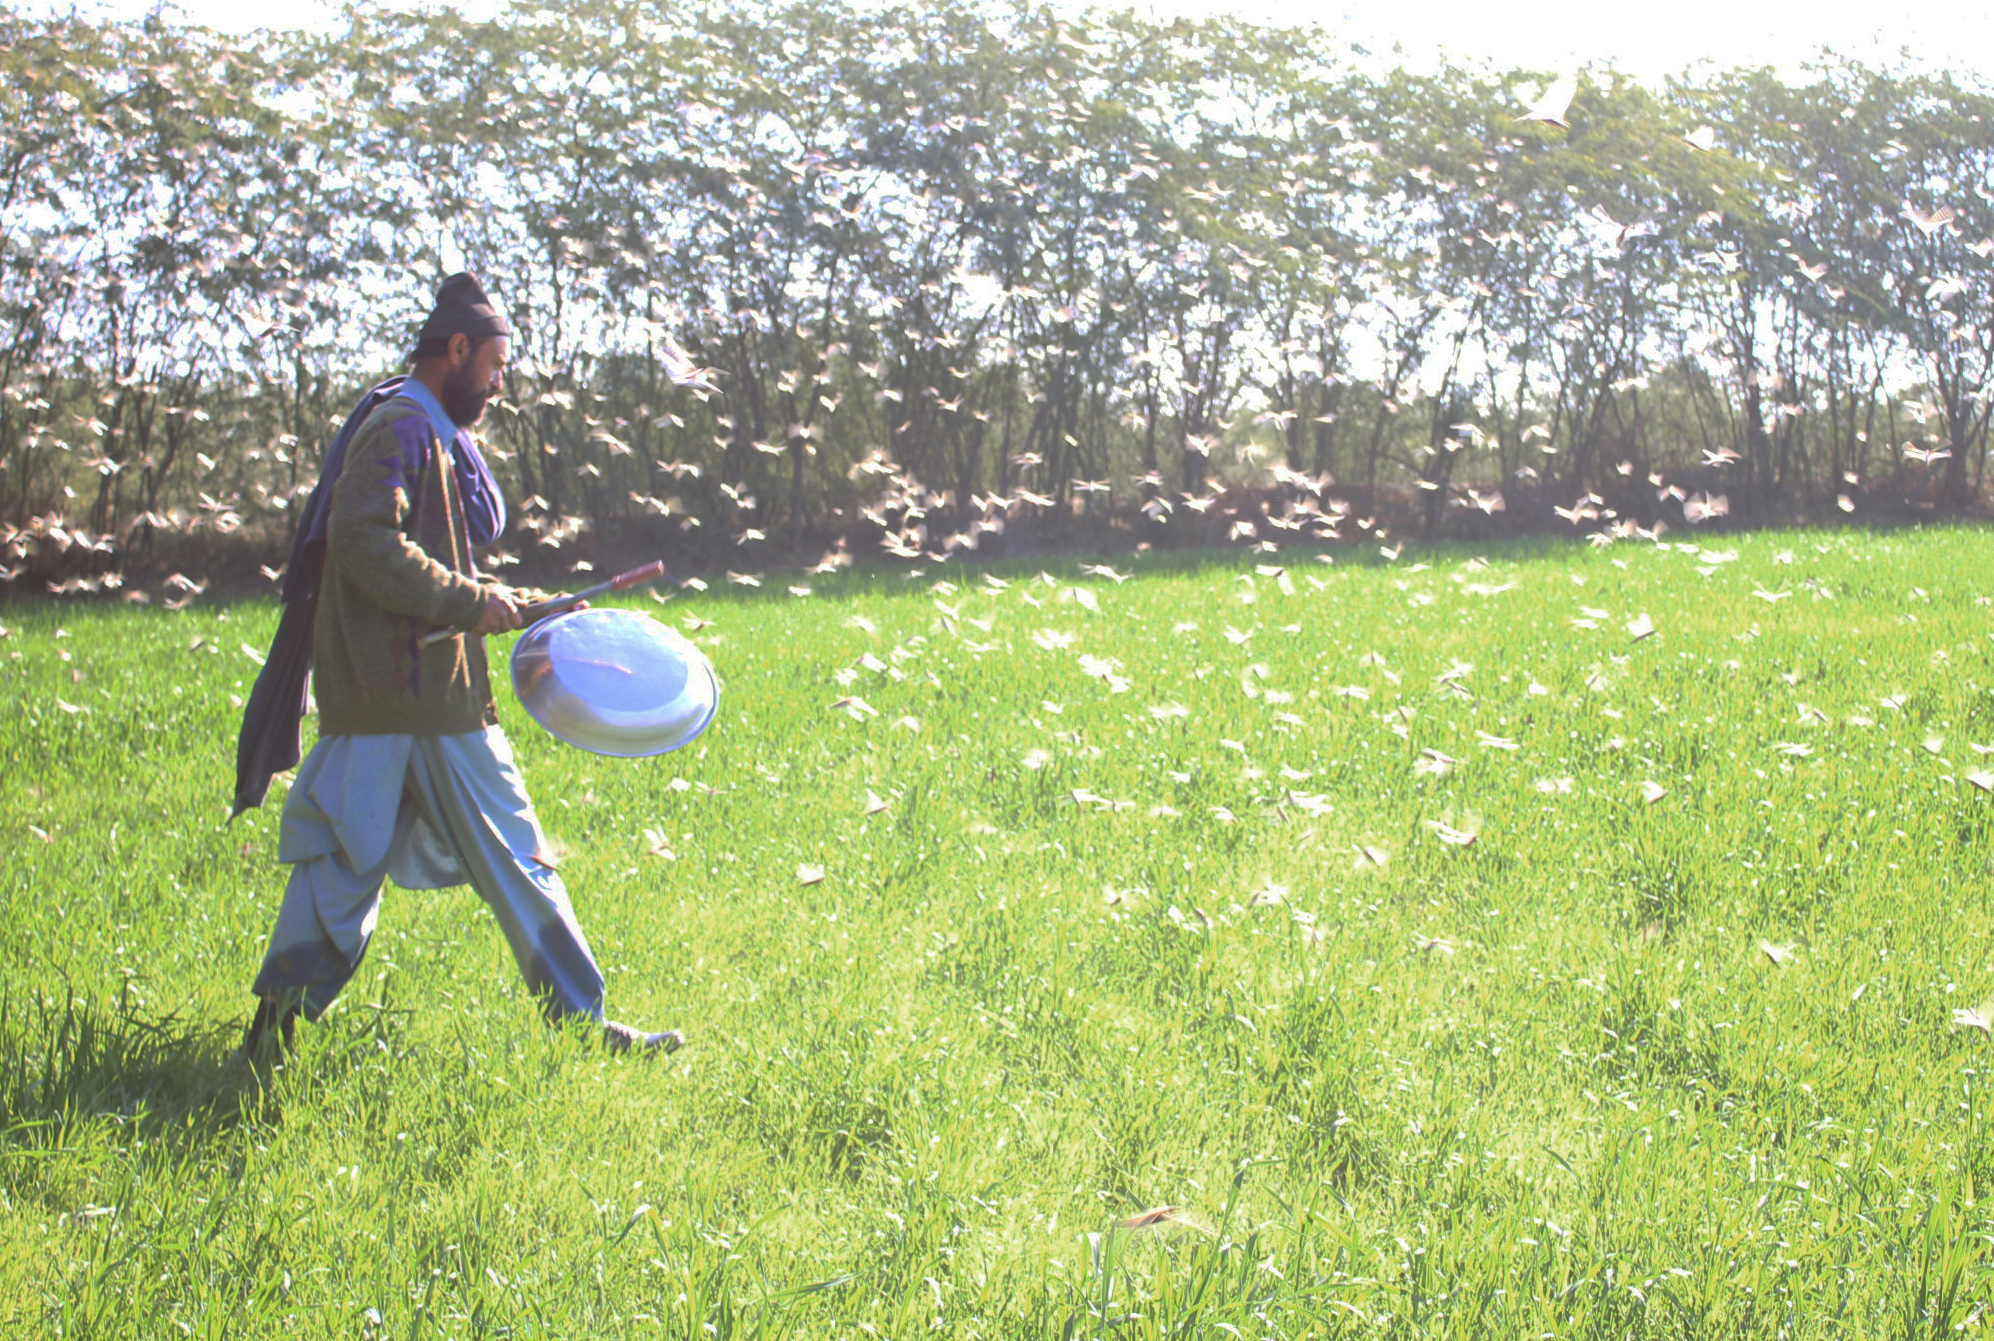 A farmer creates noise using pots and pans to 'scare off' locusts swarms [image by: Sirajuddin]